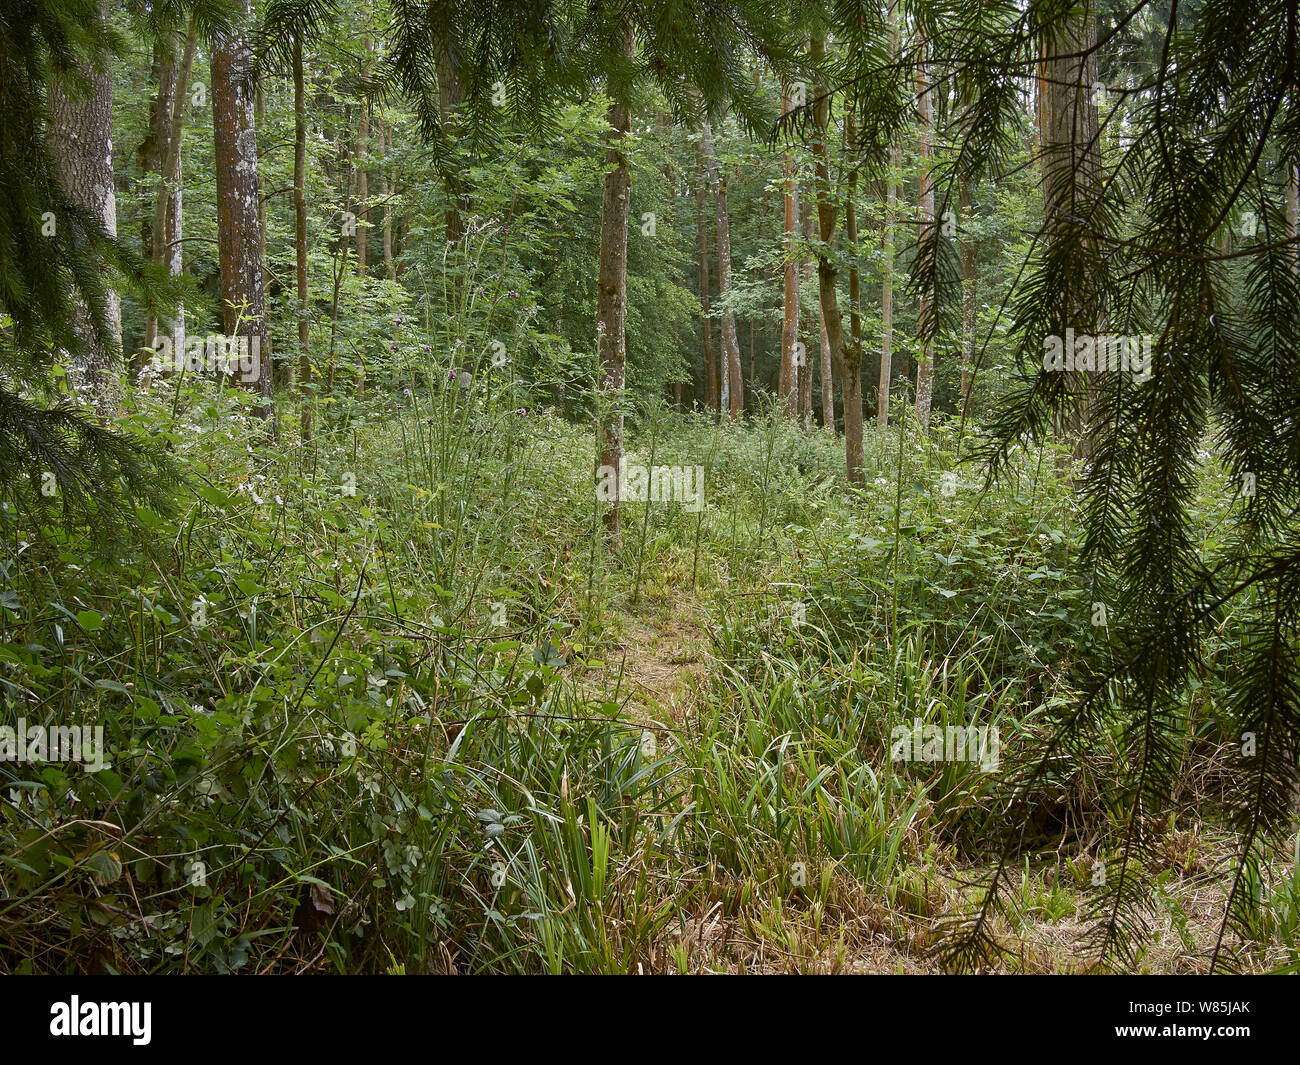 Woodland protected by deer fence, see image 1501473 for non protected area which has been overgrazed. Sussex, England, UK. June. Stock Photo